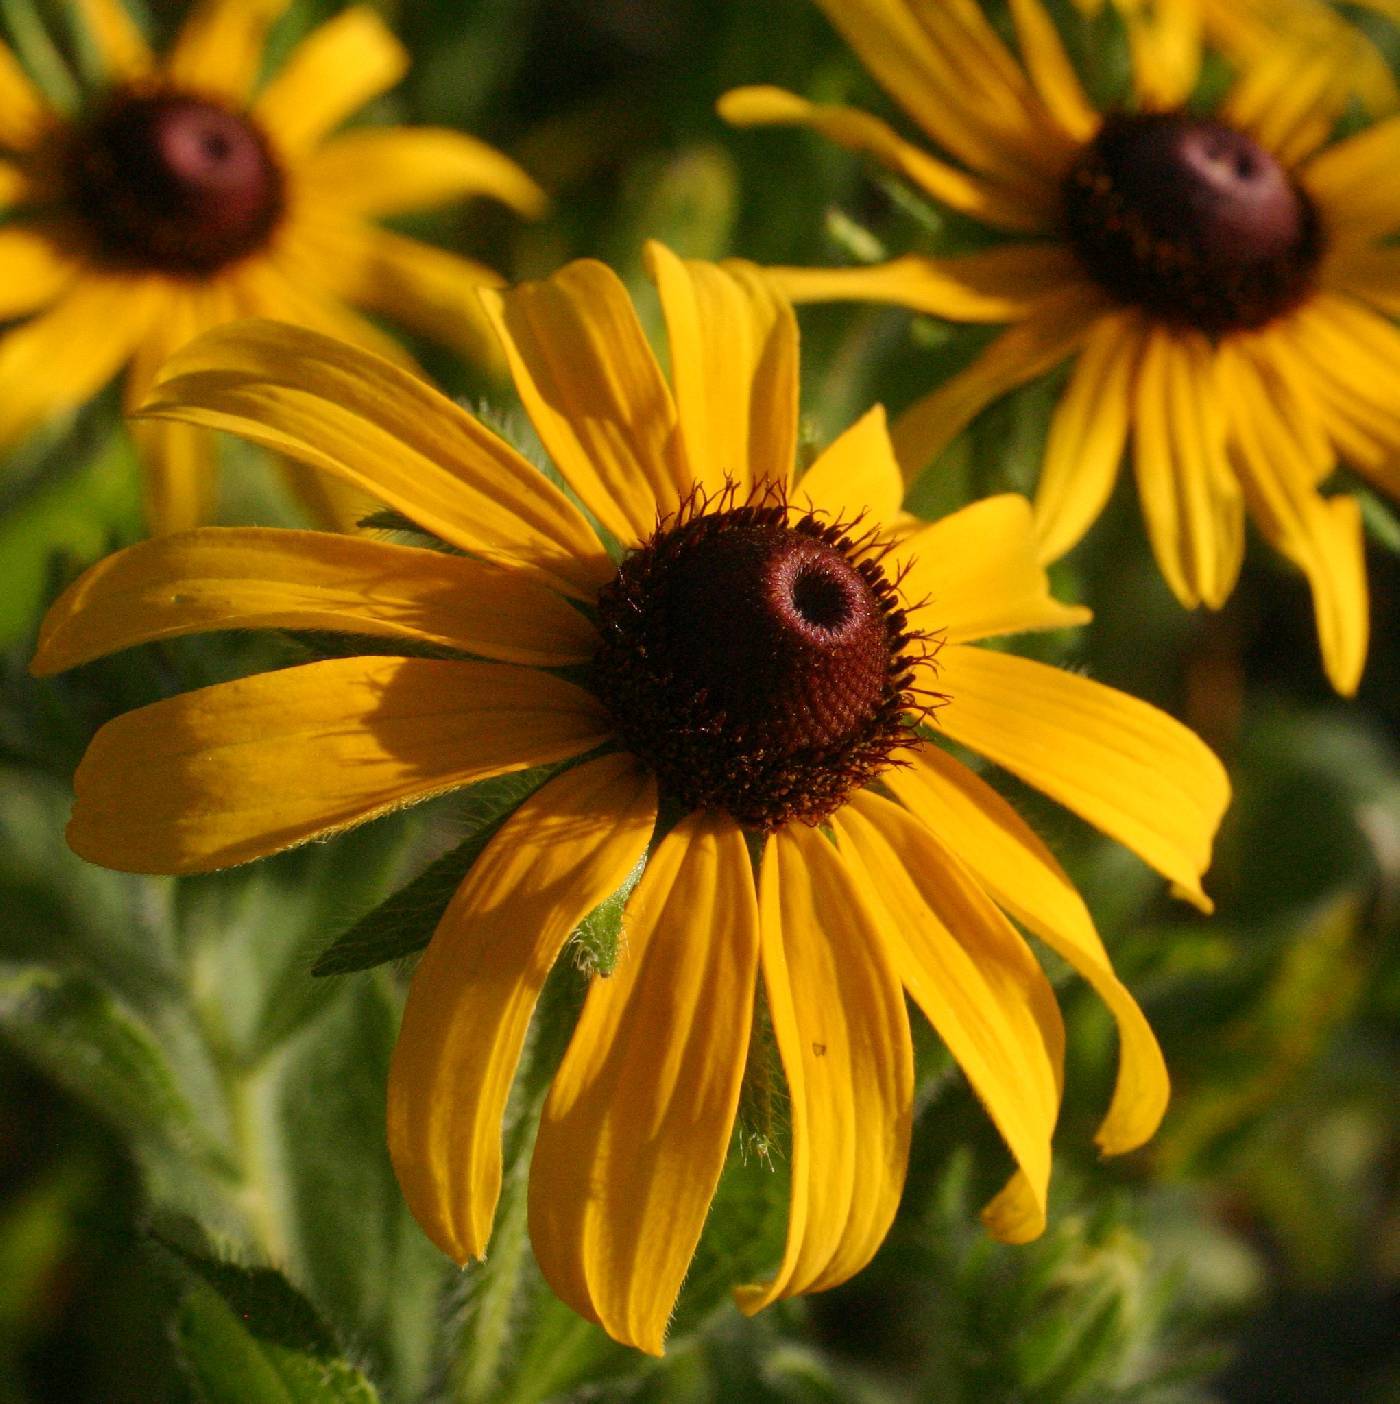 Black-Eyed Susans have dark brown centers surrounded by multiple, pointy, golden yellow petals.